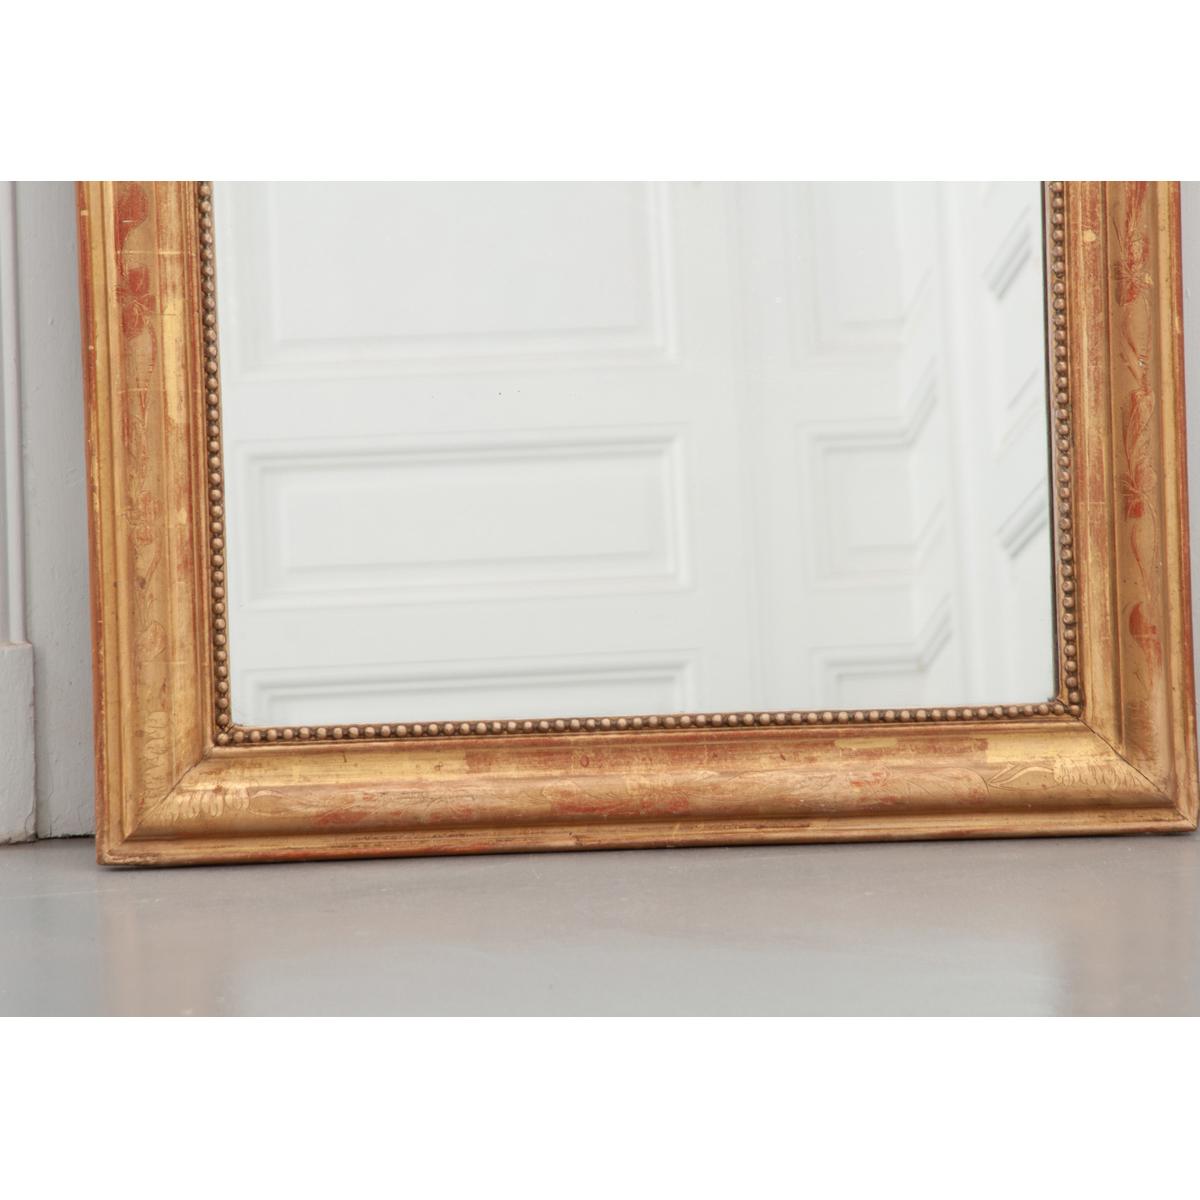 This fantastic gold gilt Louis Philippe-style mirror still features its original mirror plate. The frame has a finely detailed motif of flowers continuing around the whole and a carved pearl perimeter that runs along the mirror plate edge. Bold